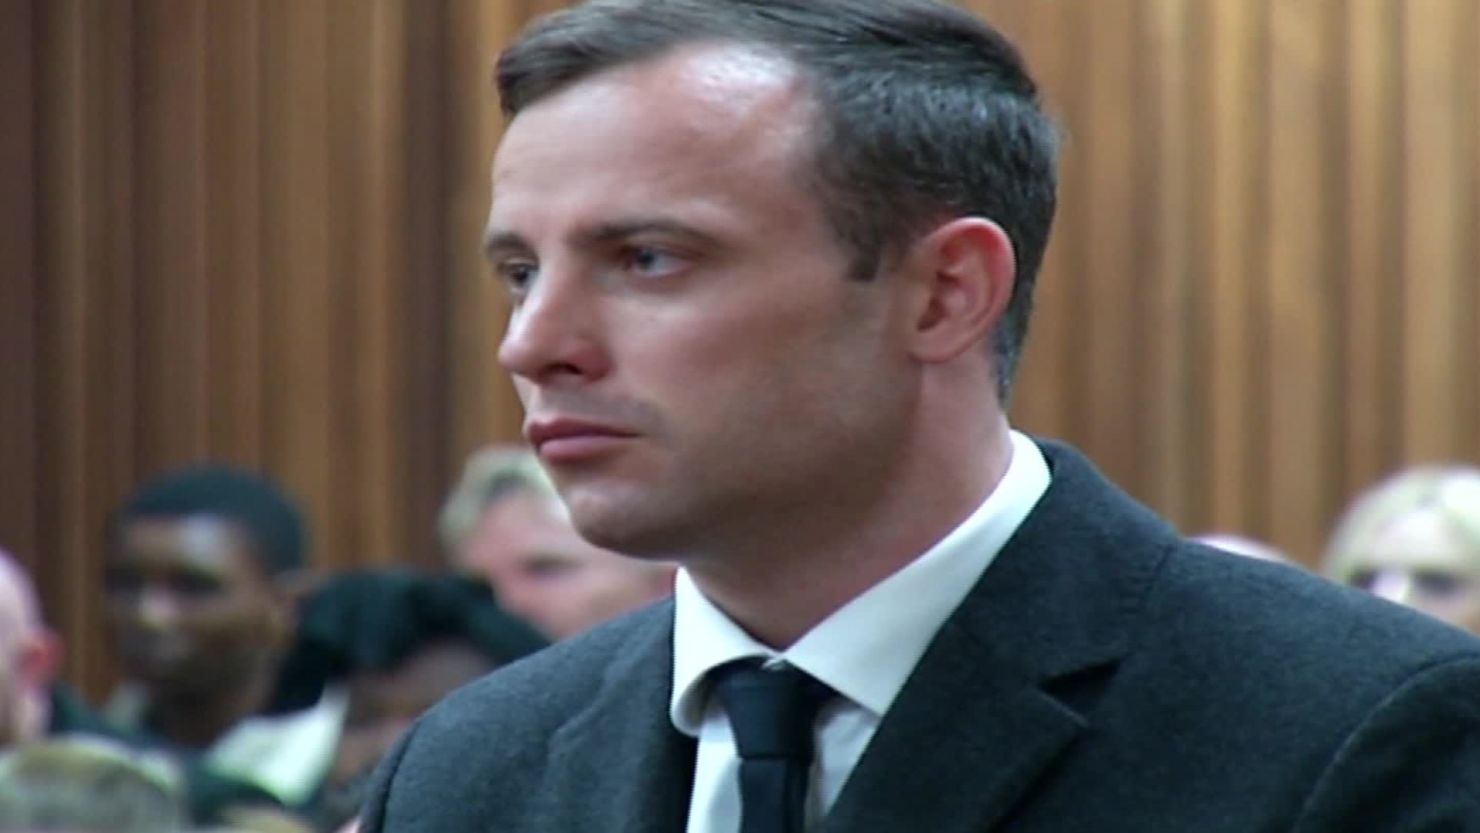 The sentence of Oscar Pistorious has been appealed.